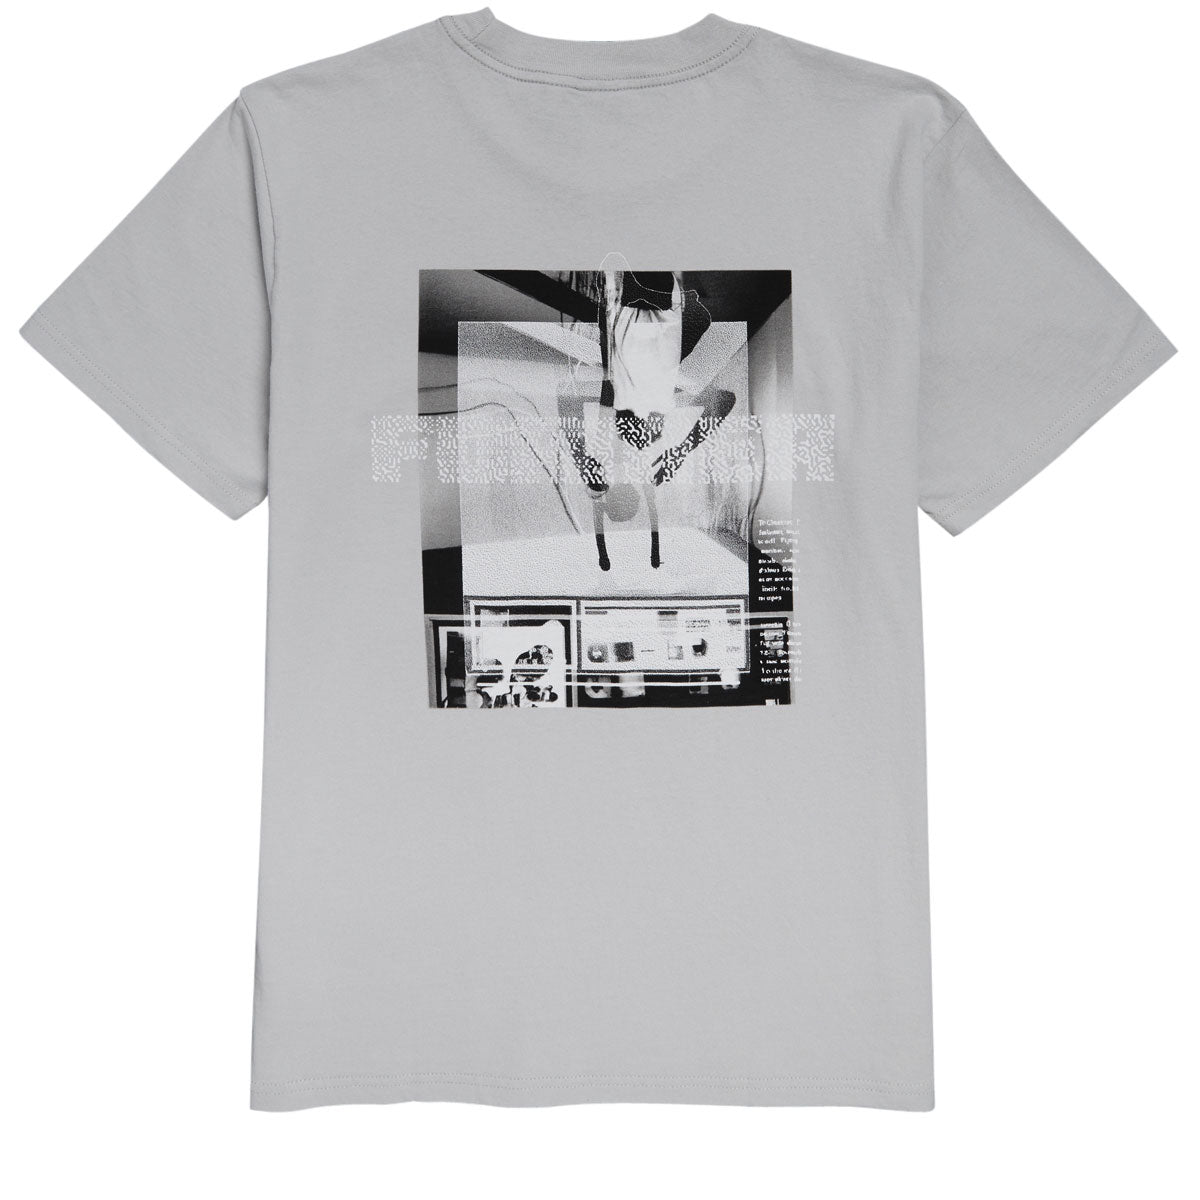 Former Ocillate T-Shirt - Concrete image 1